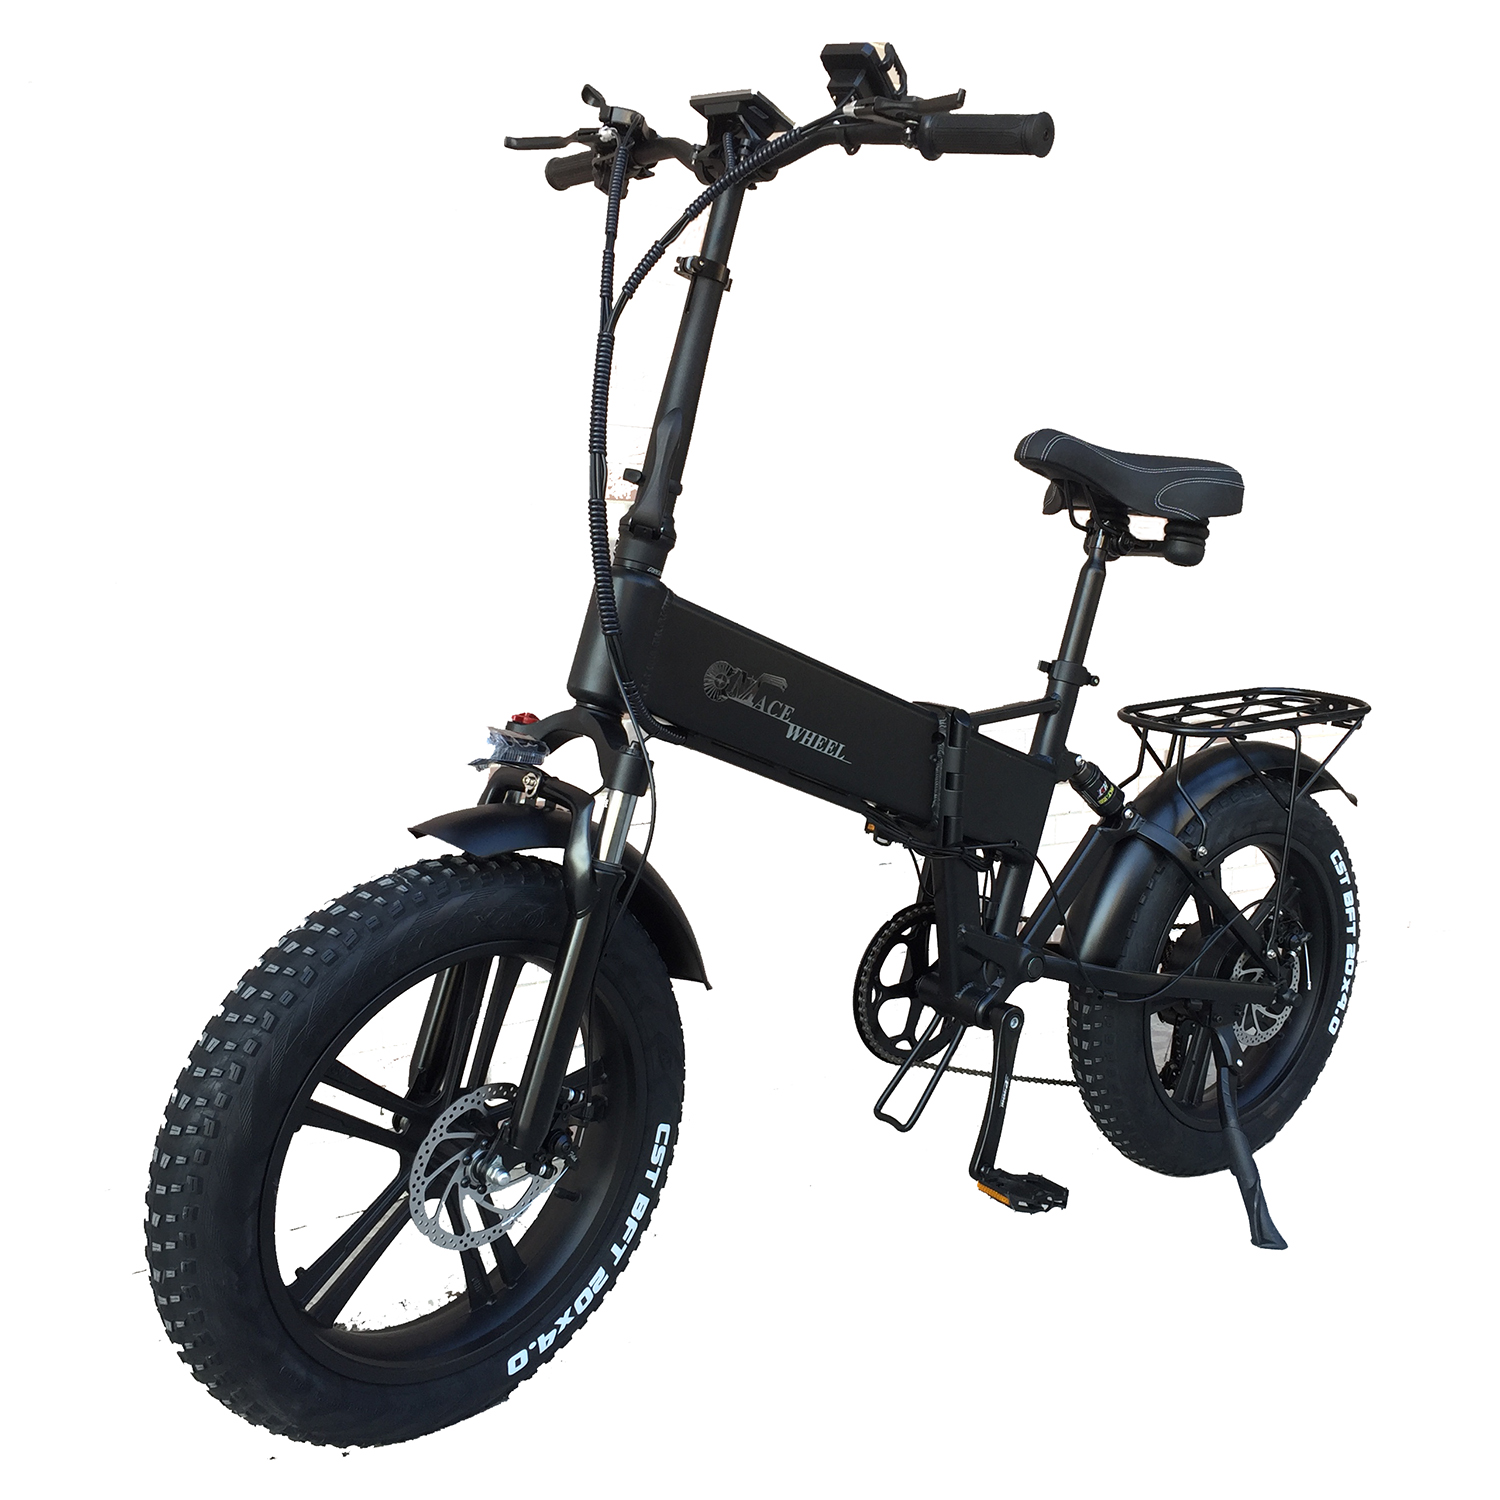 Find EU DIRECT CMACEWHEEL RX20 One Wheel 15Ah 48V 750W 20in Folding Electric Bike City E Bike for Sale on Gipsybee.com with cryptocurrencies